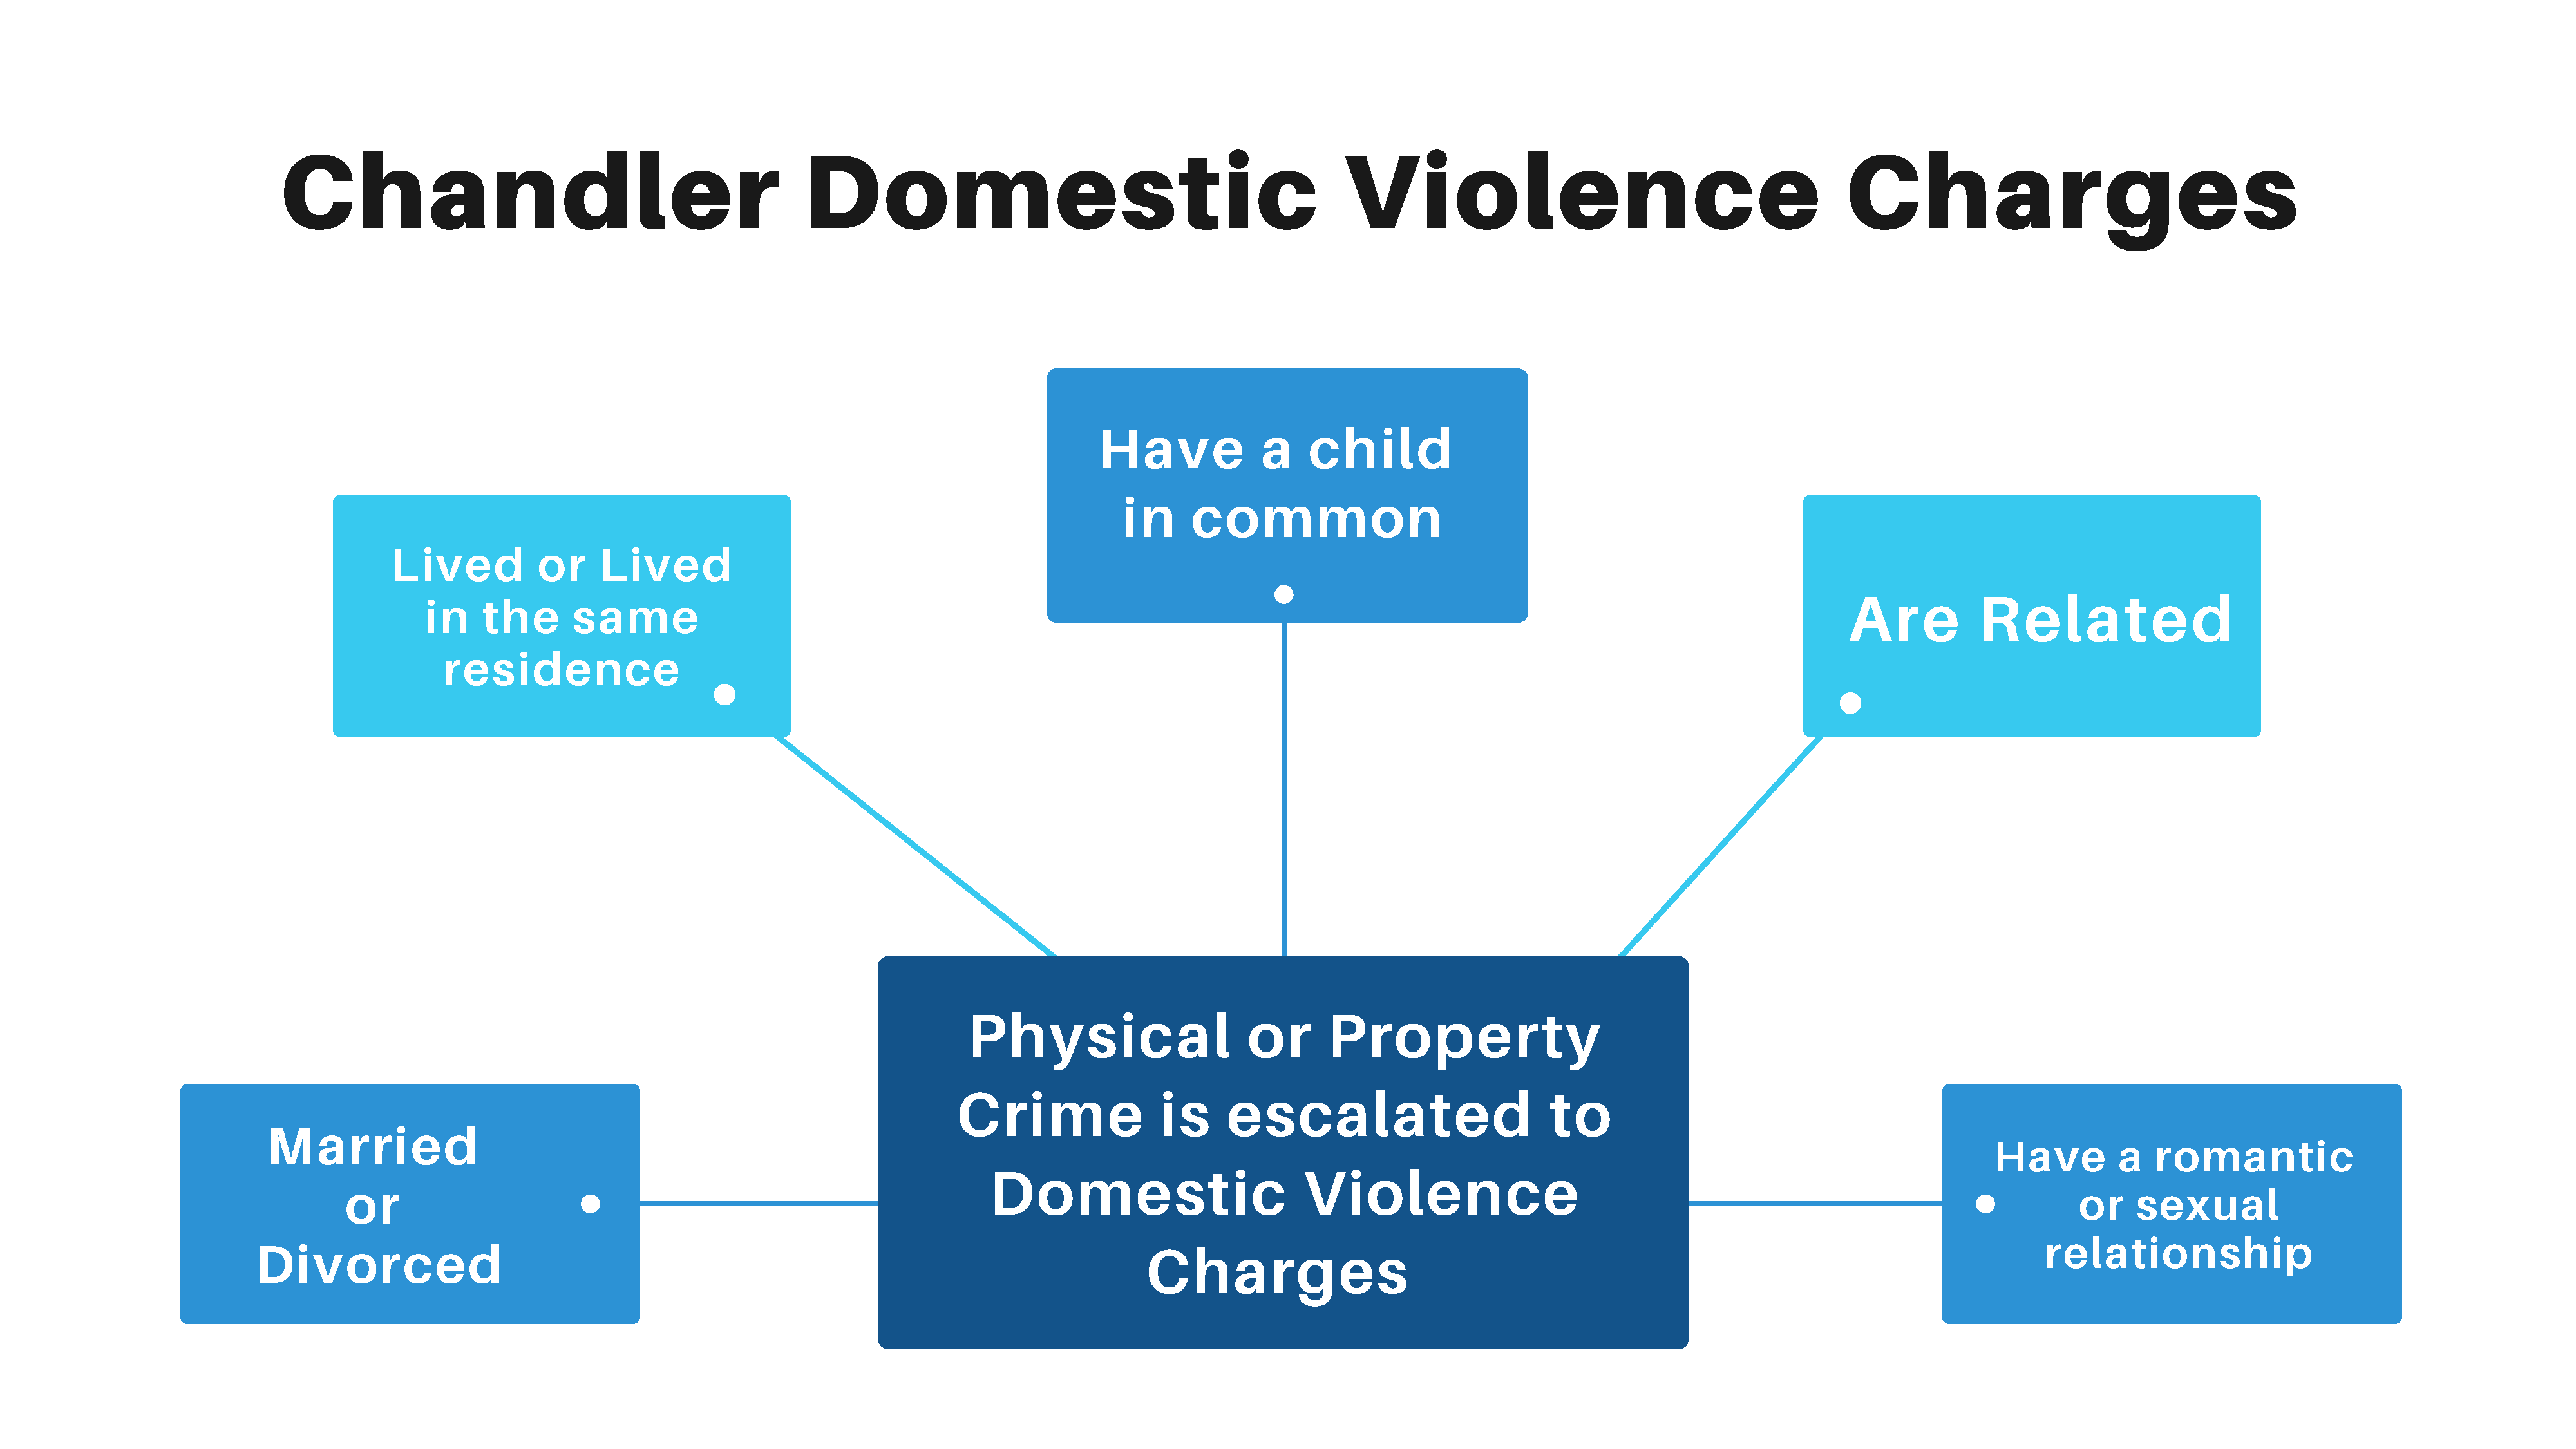 Domestic Violence Charges Chandler chart